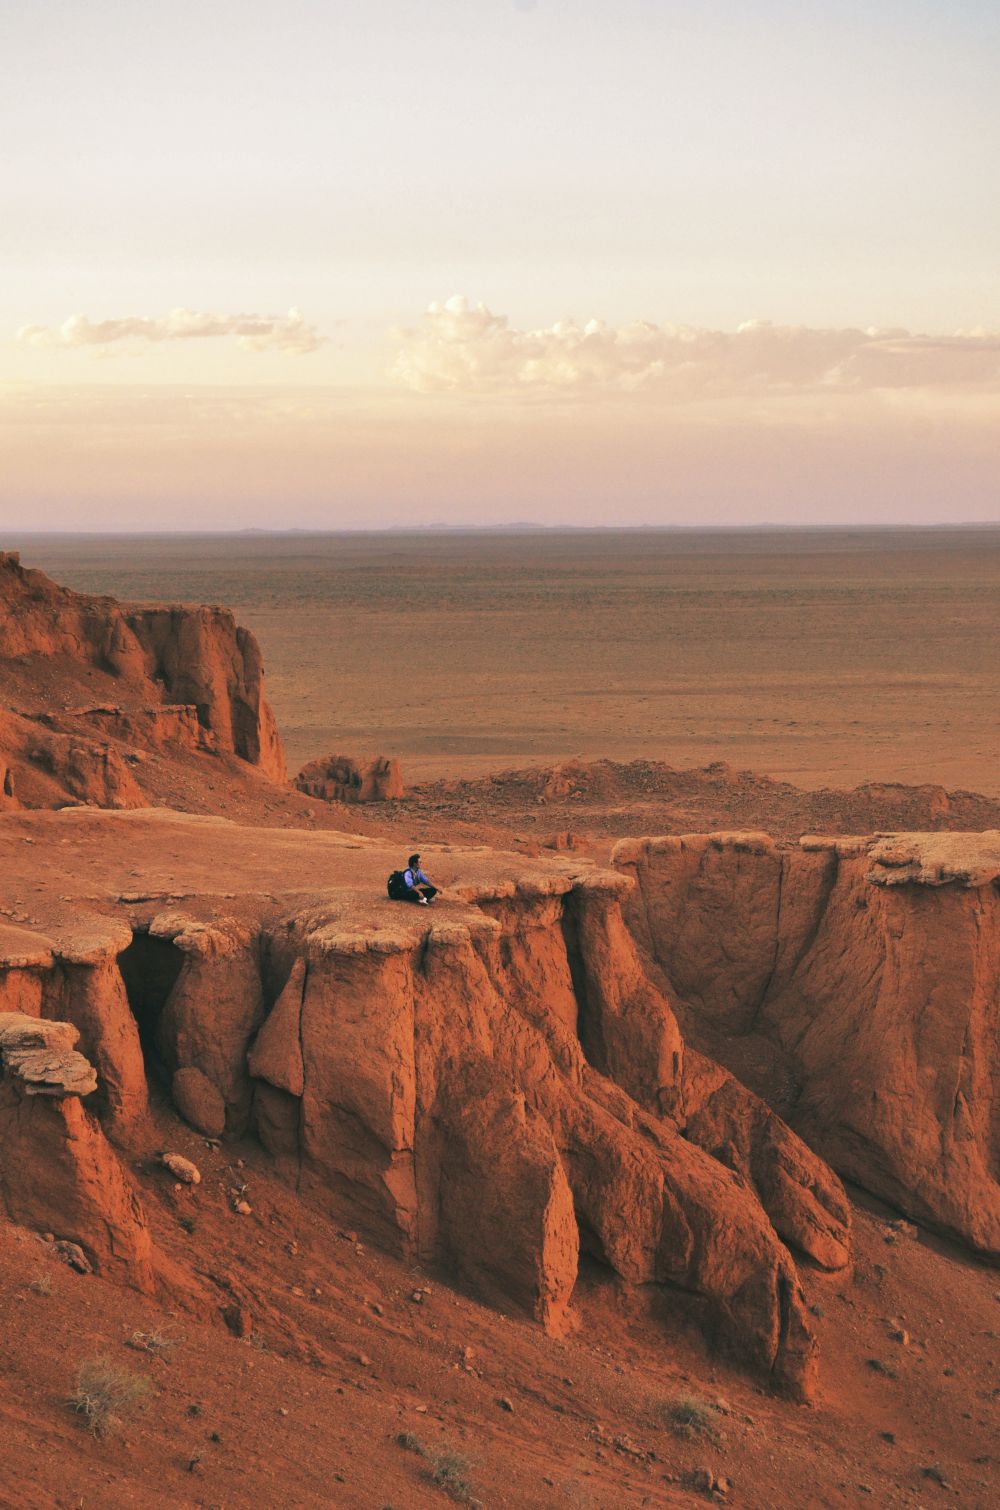 A man on flaming cliffs in Mongolia